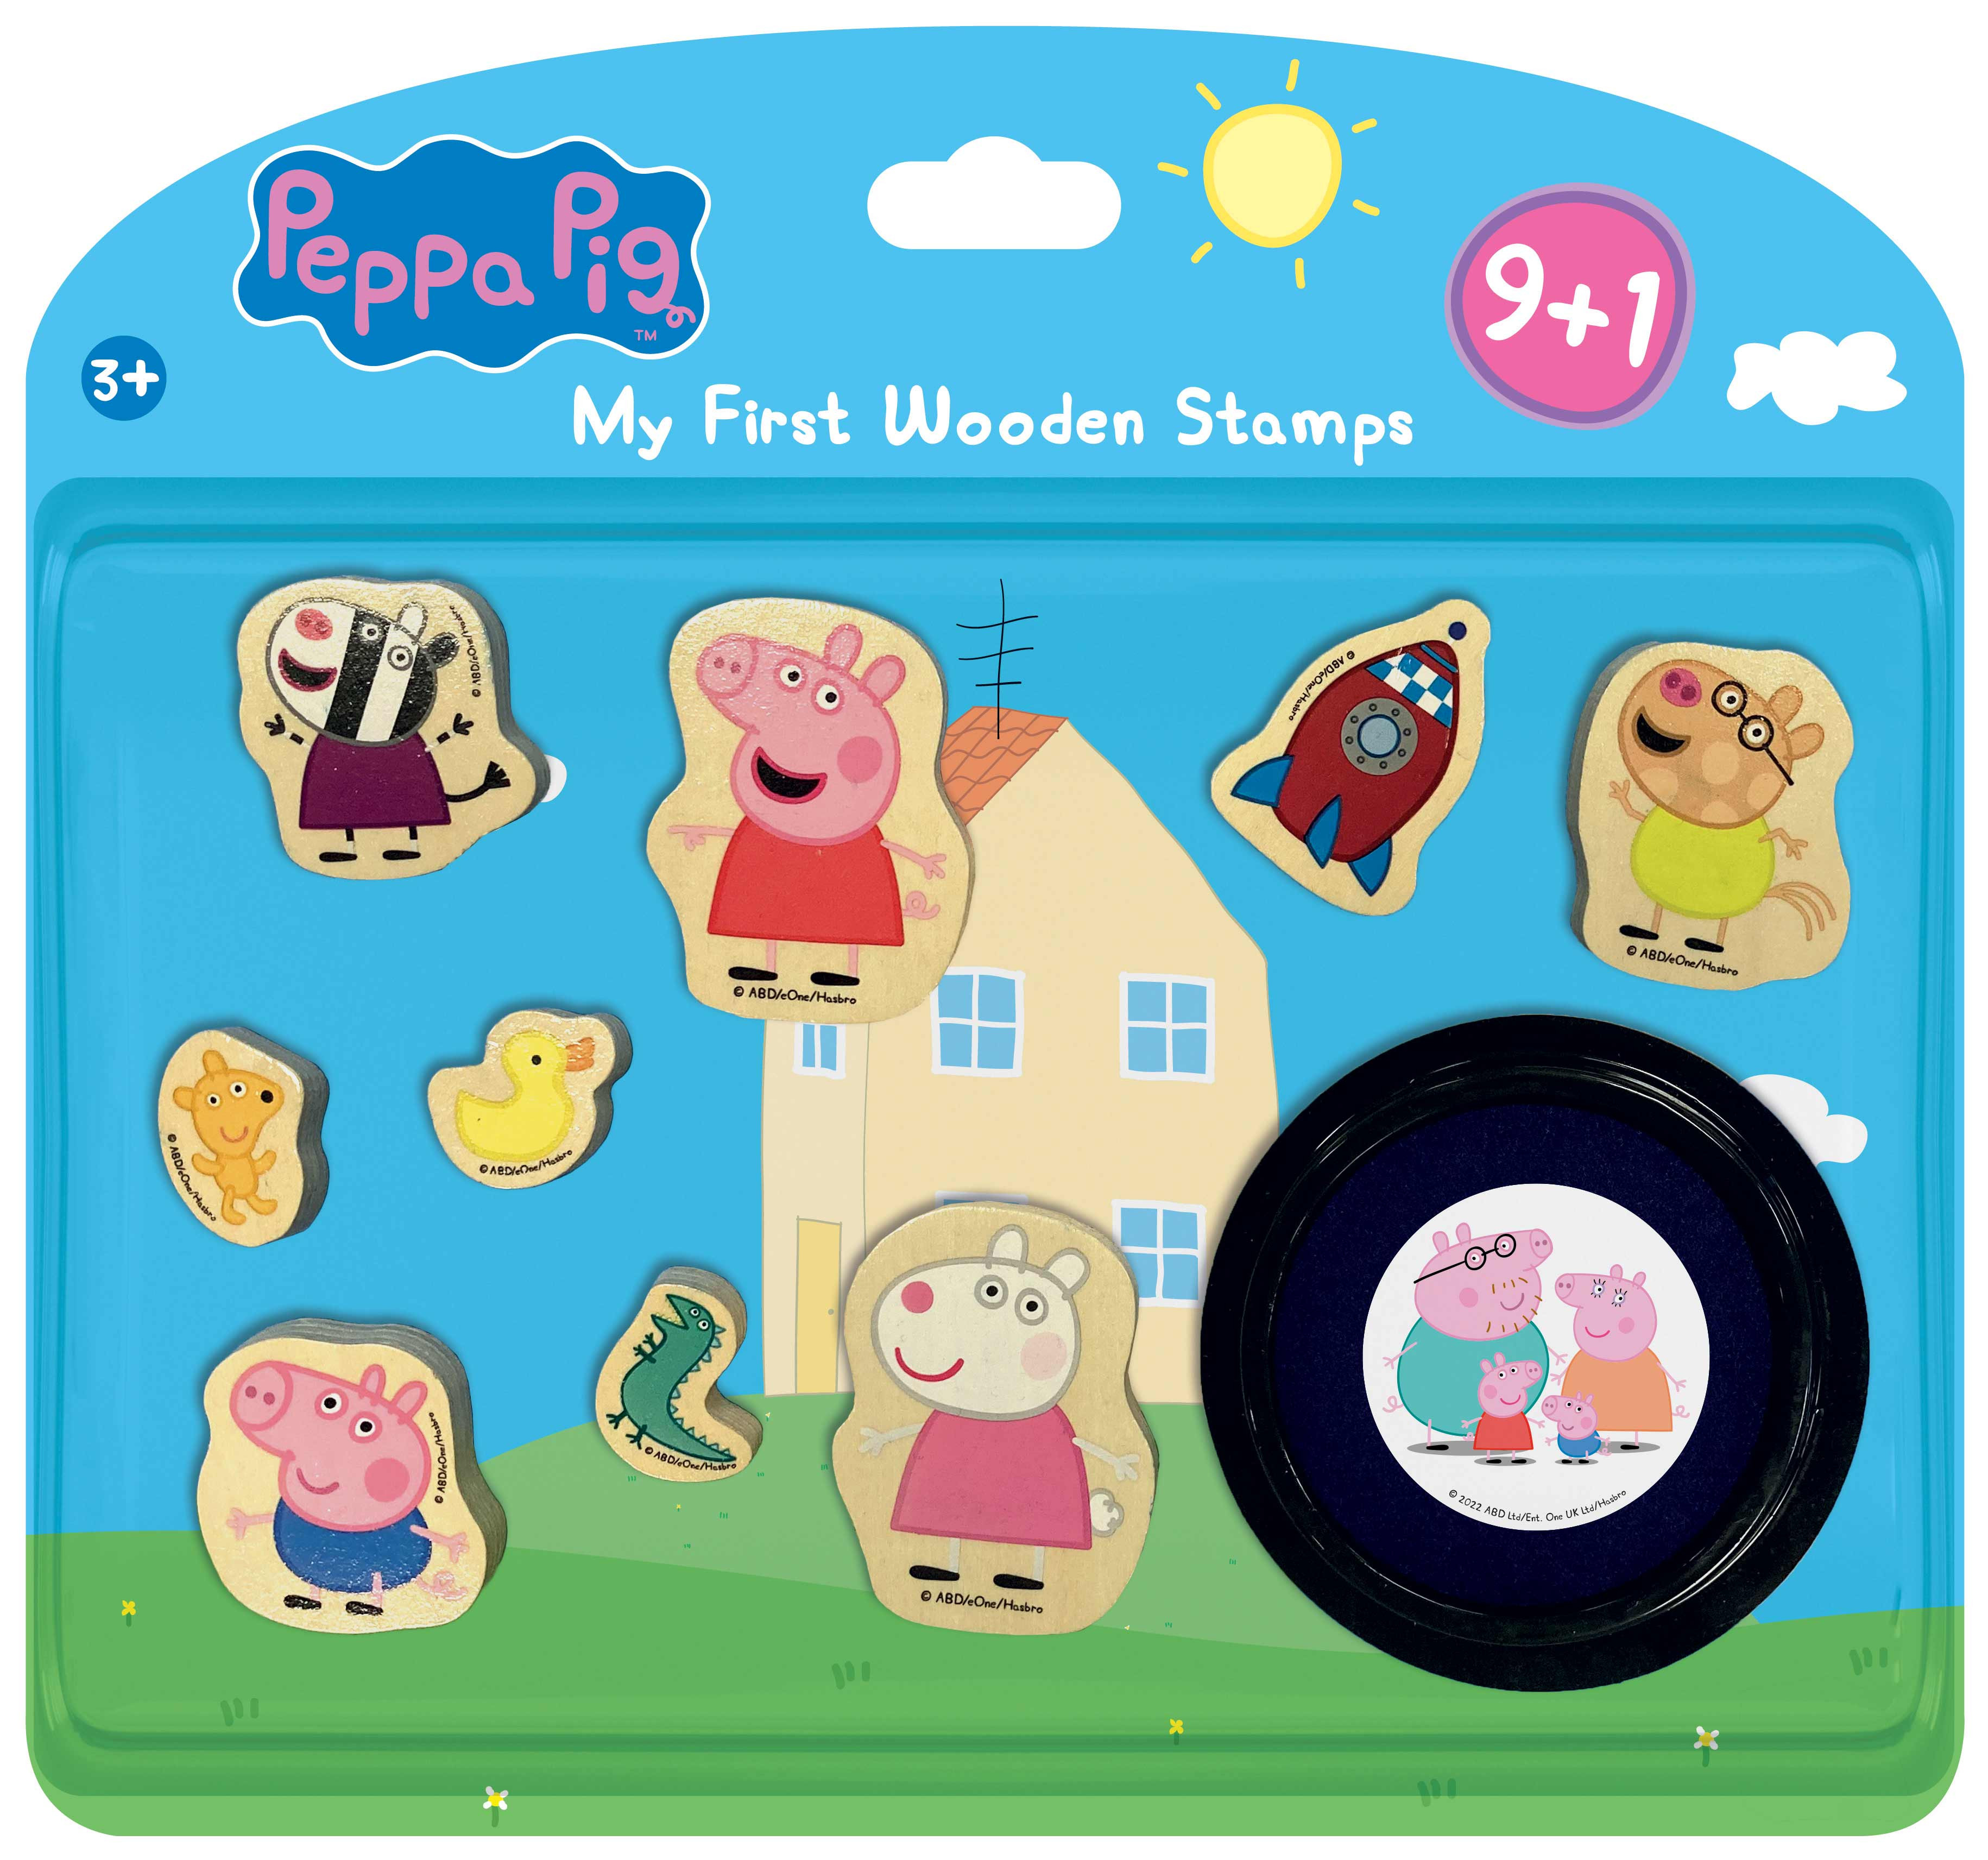 Peppa Pig stamps